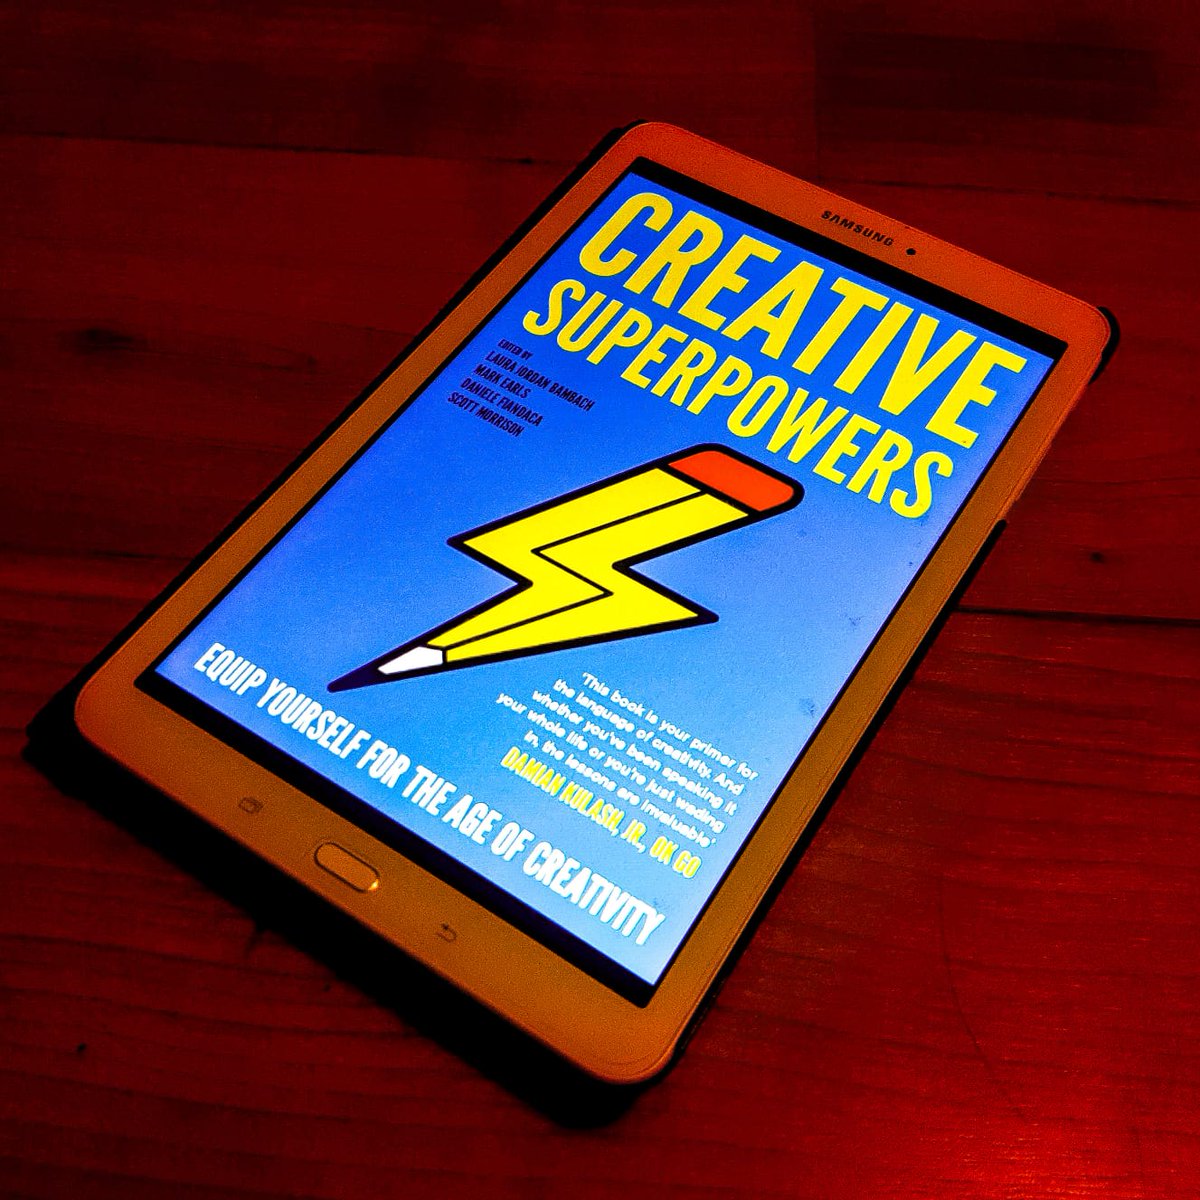 'Creative Superpowers' by, well... a whole host of interesting folks! Packed w/ actionable advice for nurturing creativity, thinking outside the box, and letting go of perfectionism (and fears) that hold us back from creating, growing + sharing.  #EveryOneIsCreative  #AmReading